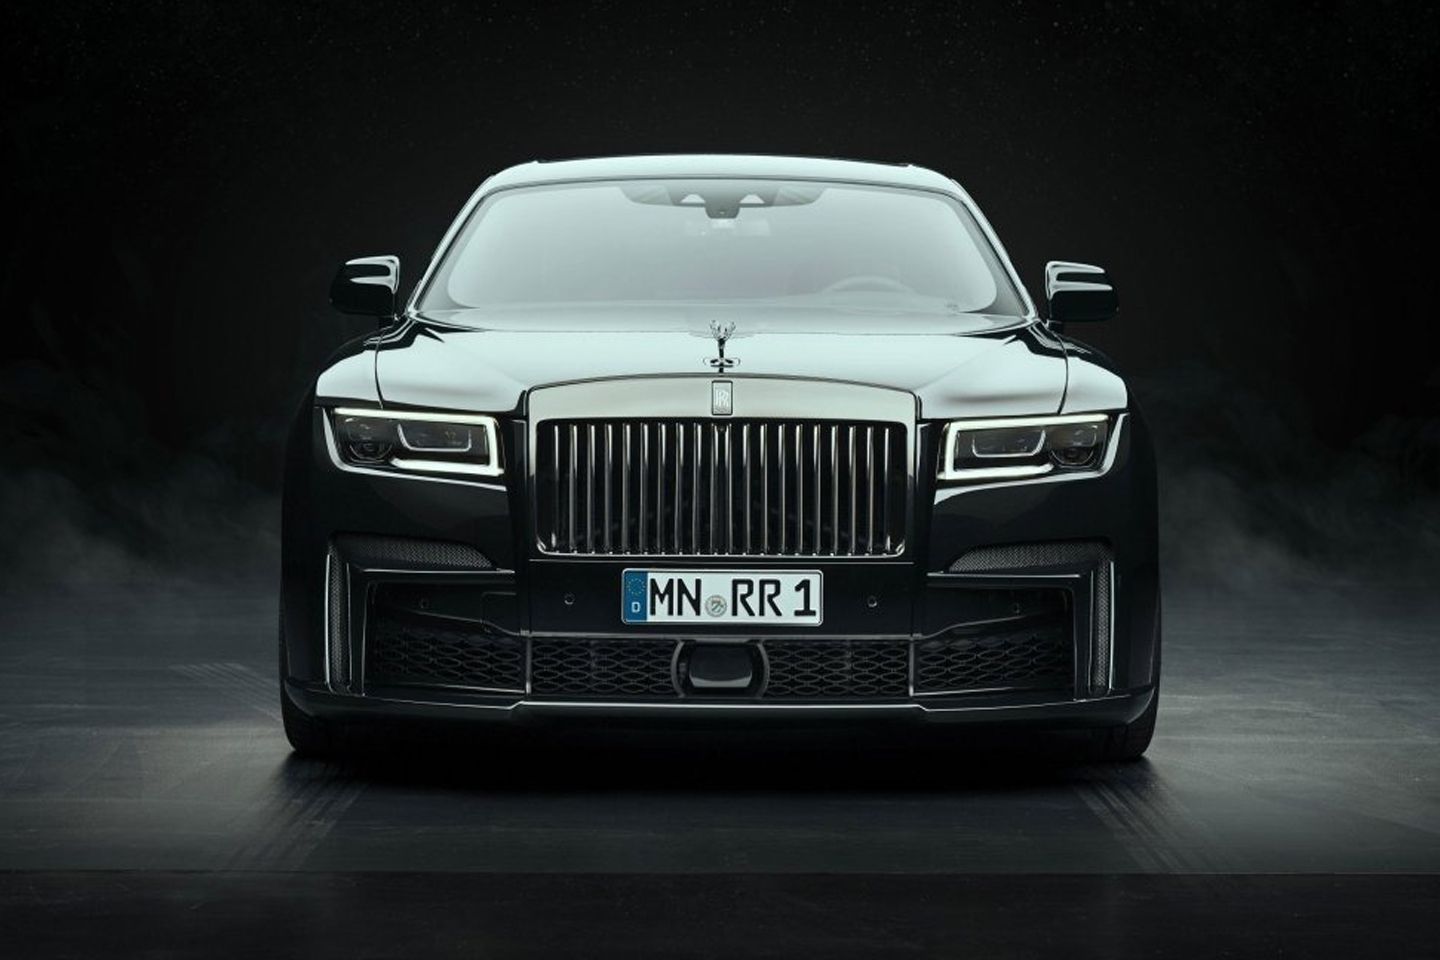 Rolls-Royce Ghost Black Badge By Spofec Makes 706 HP, Gets New Face